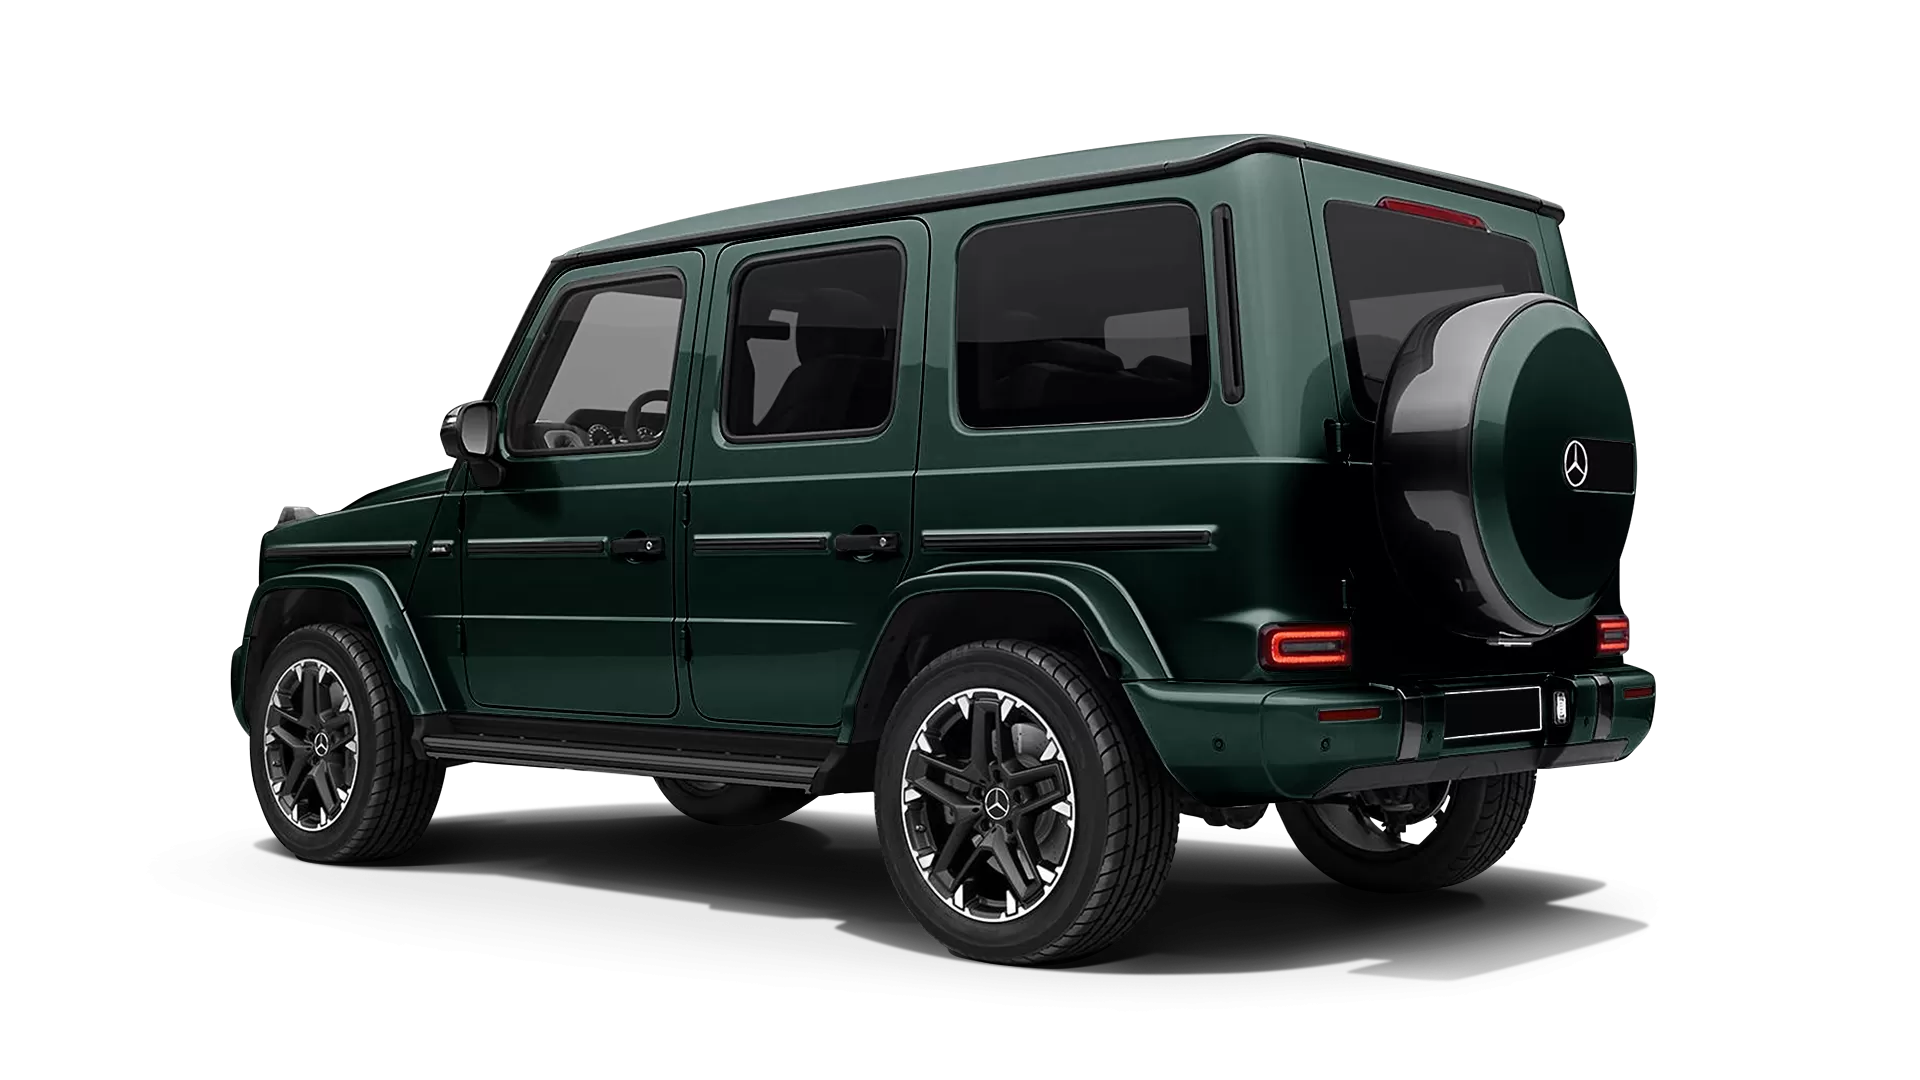 Mercedes G class W463 stock rear view in Emerald Green color